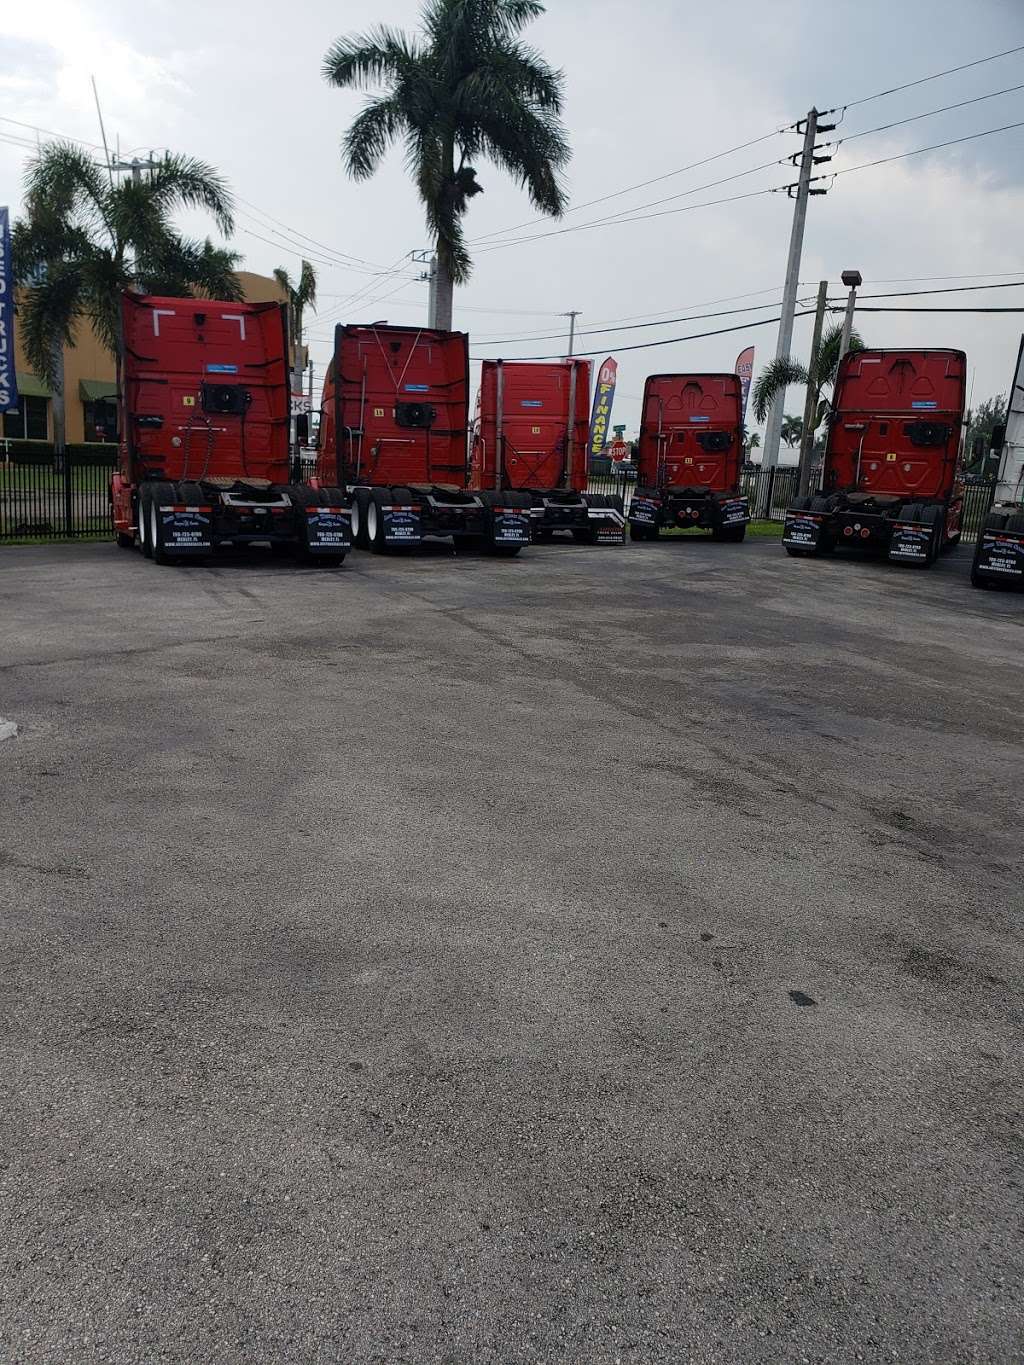 JATI TRUCK SALES - store  | Photo 10 of 10 | Address: 11400 NW South River Dr, Medley, FL 33178, USA | Phone: (786) 725-8790